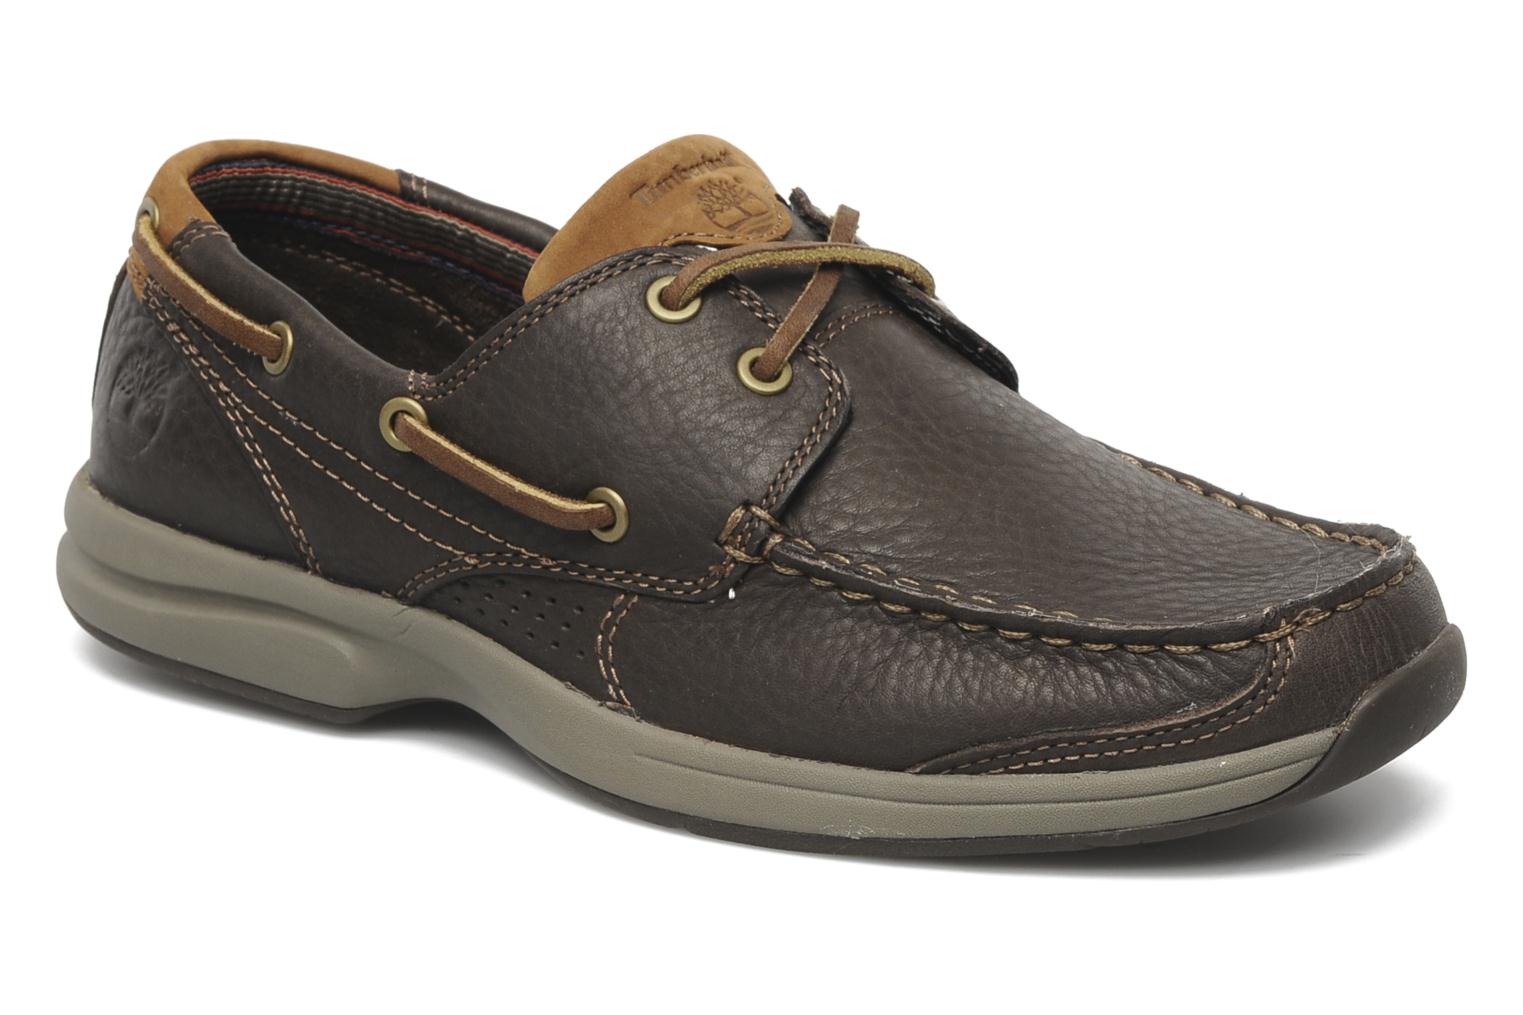 Foto Náuticos Timberland Earthkeepers Hull's Cove 2 Eye Hombre foto 432858